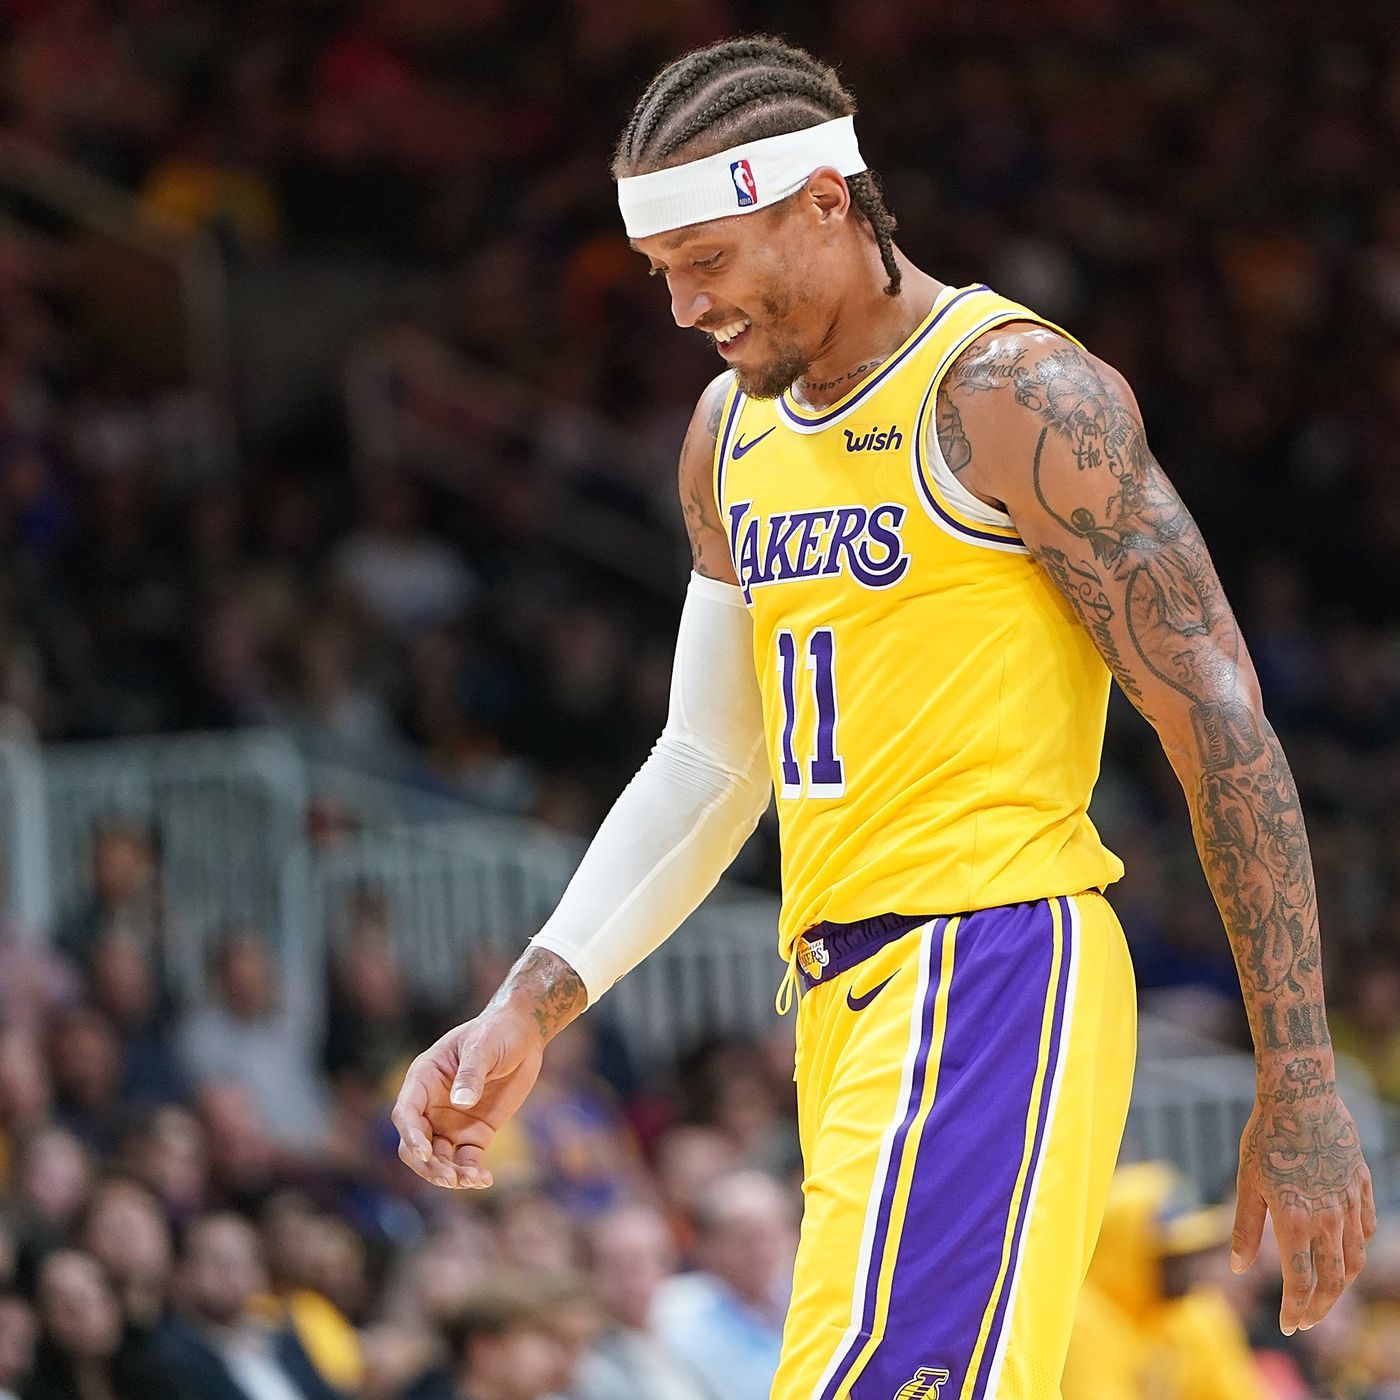 Lakers News: Michael Beasley returns to Lakers with a lot of ground to cover Screen and Roll